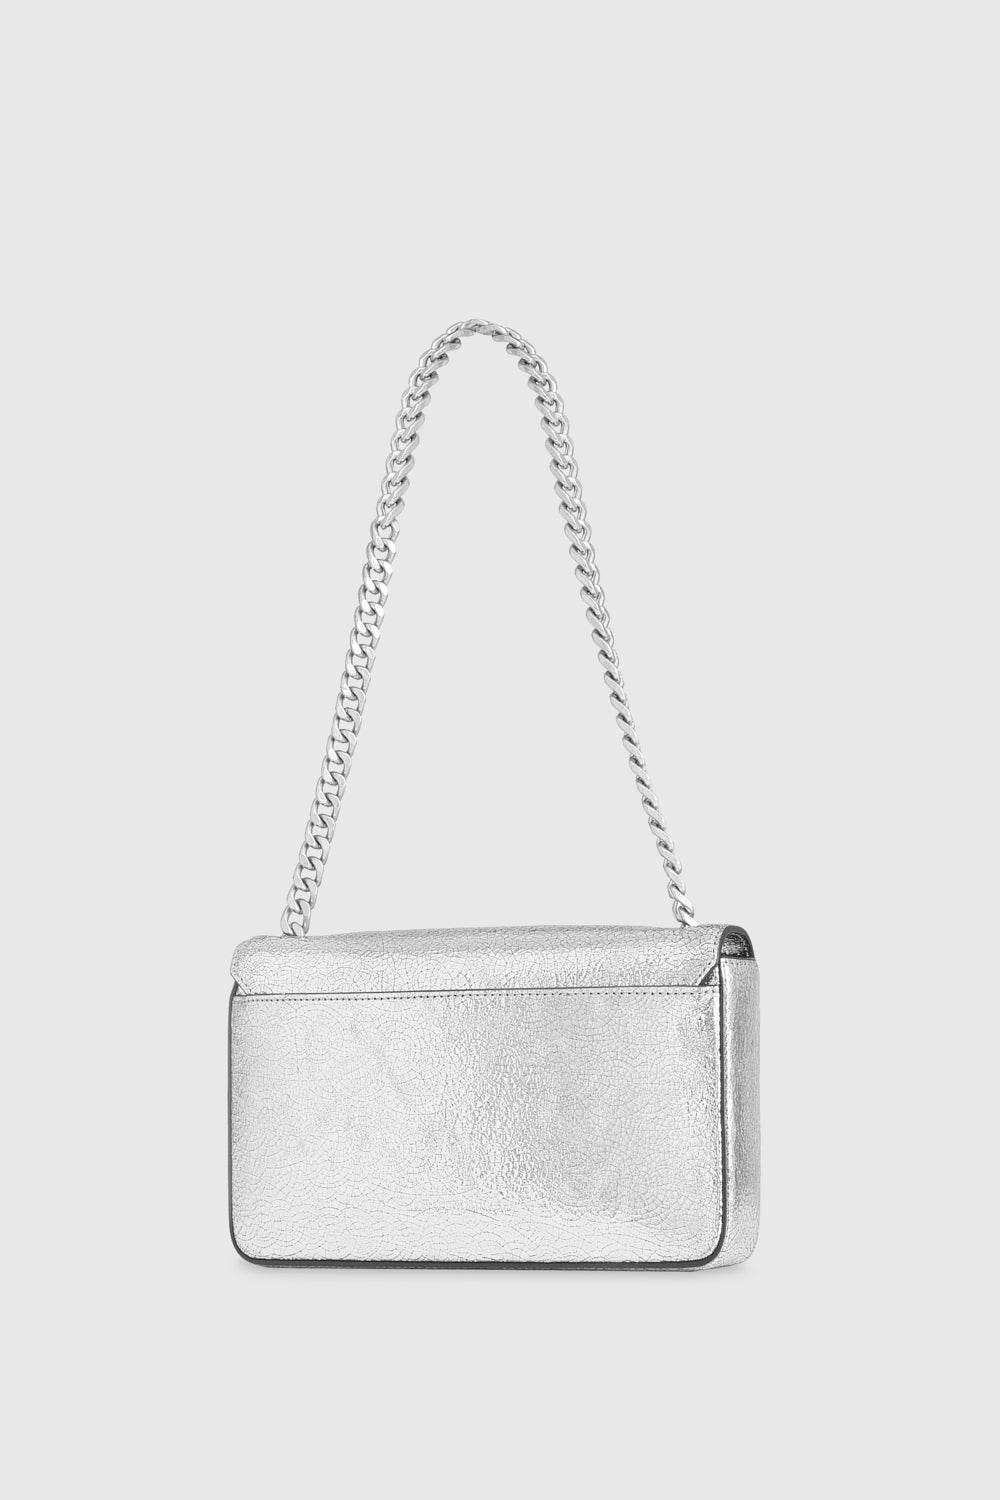 Locò Embroidered Small Shoulder Bag for Woman in Silver/crystal